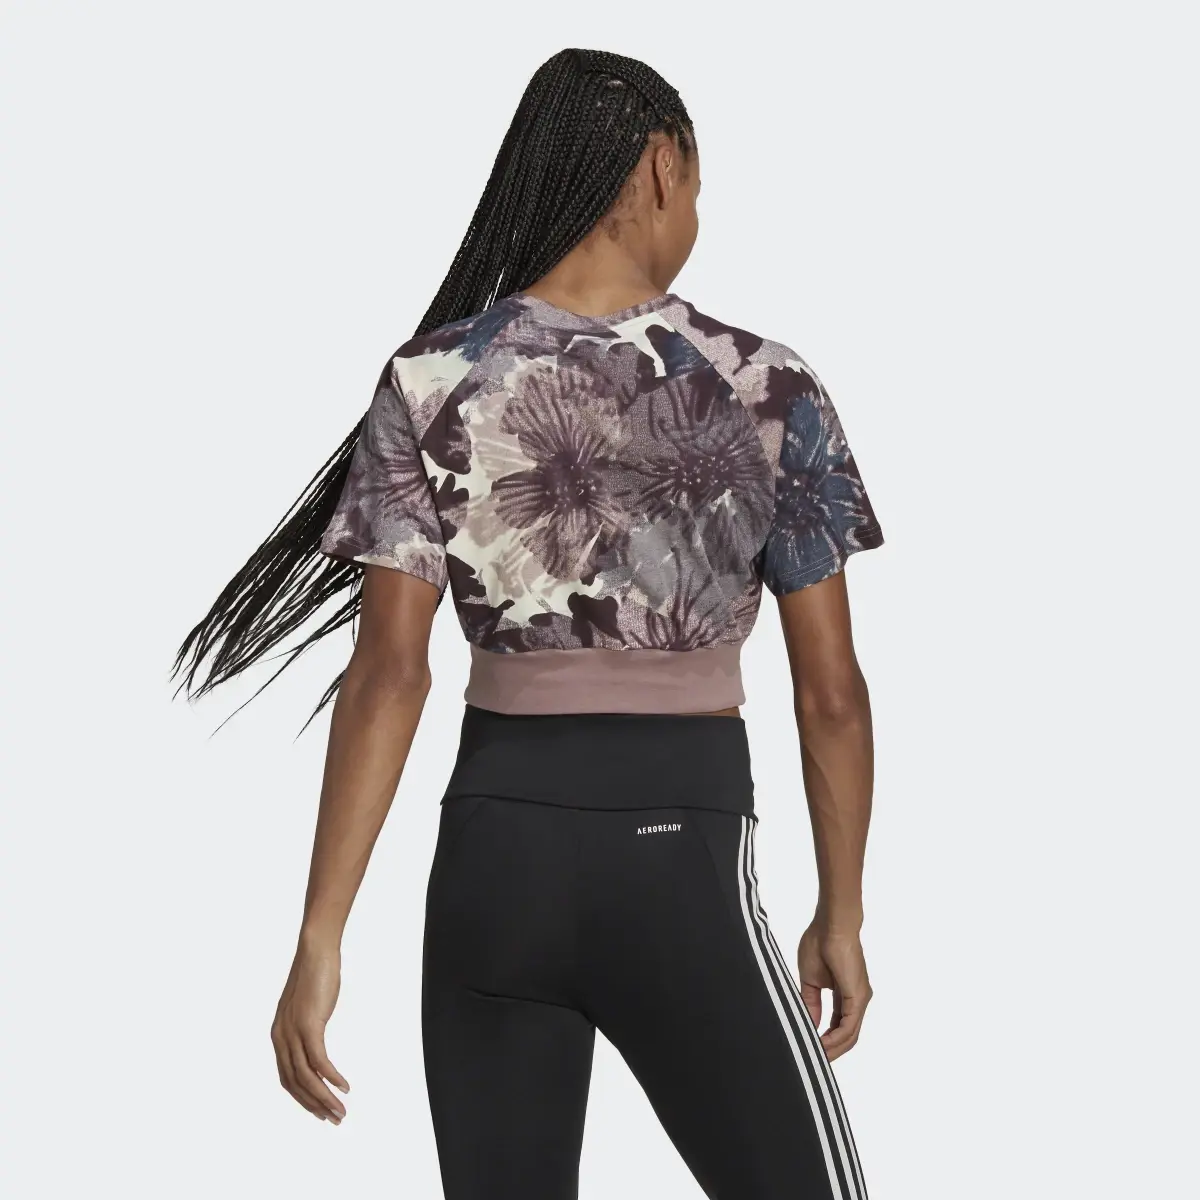 Adidas T-shirt Cropped Allover Print. 3